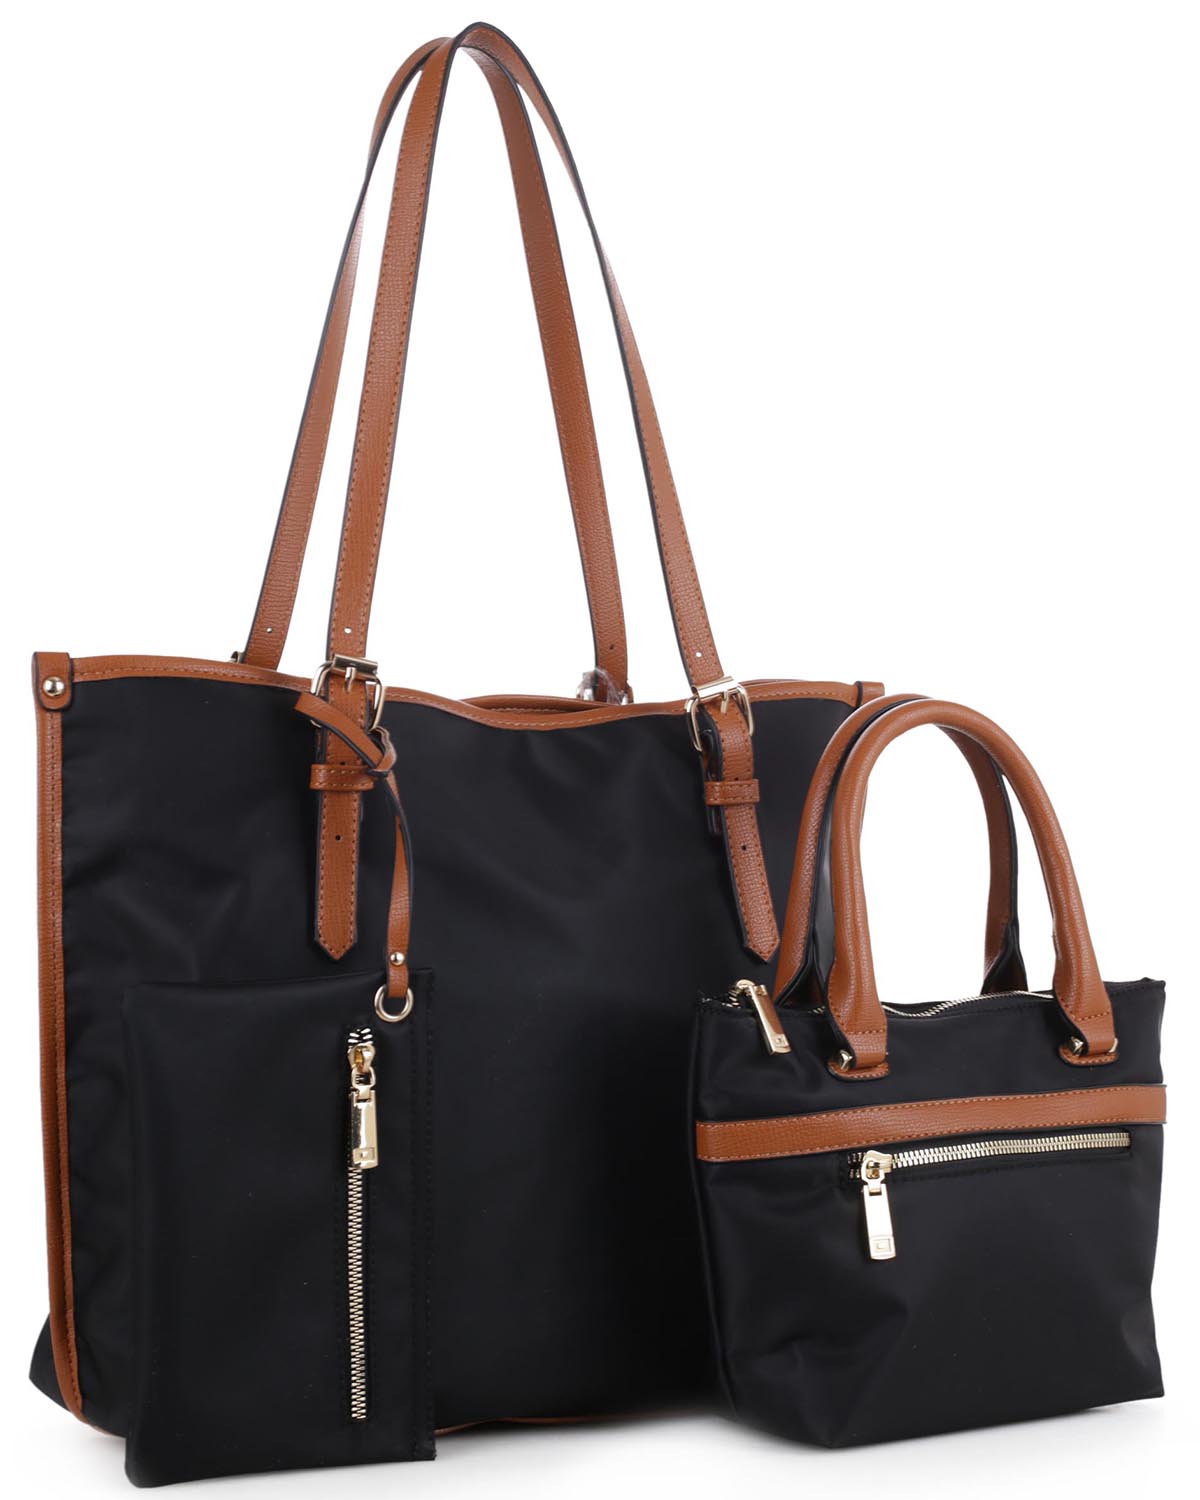 Faux Leather Nylon Tote Handbag with Messager Bag ES3166 BLACK/BROWN